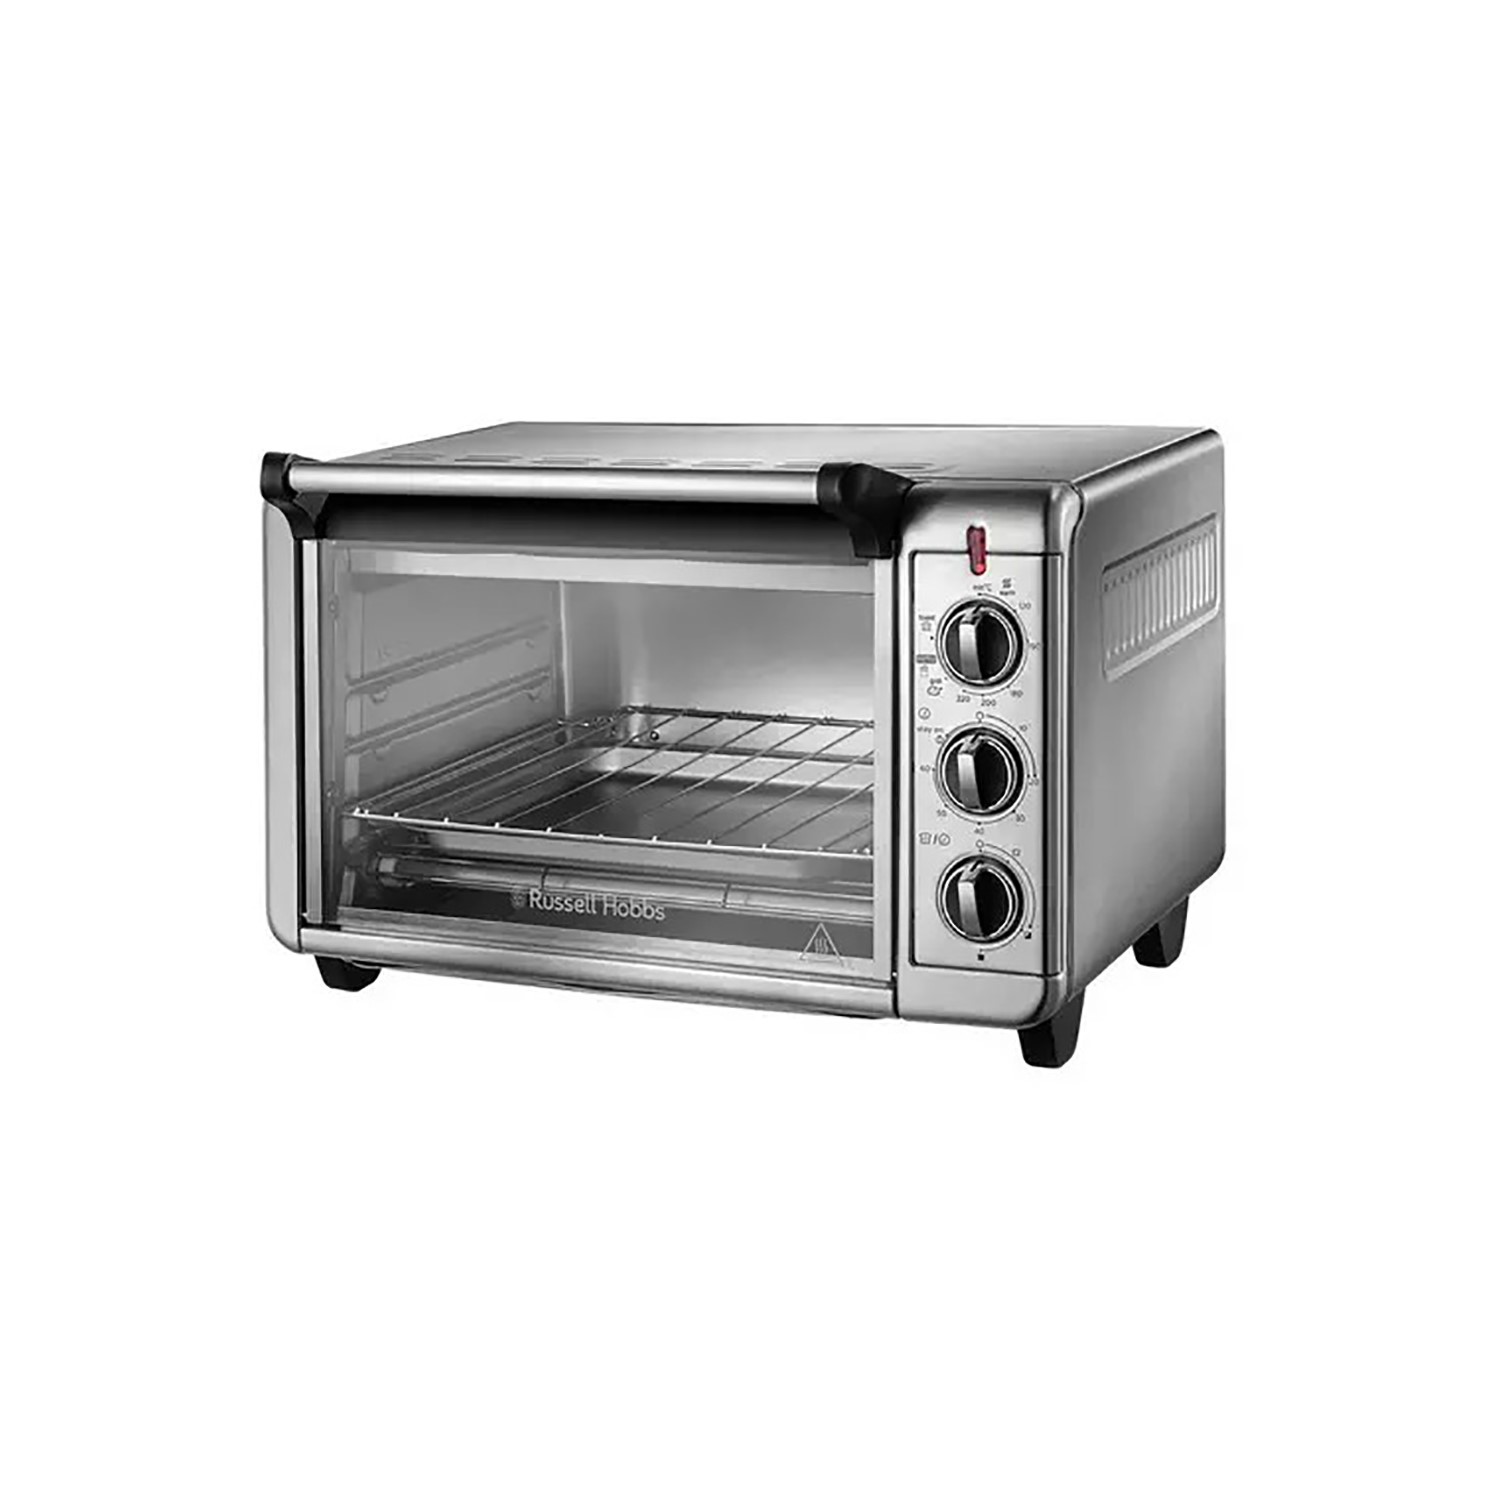 Russell Hobbs Express Air Fry 26095 Mini Oven - Silver